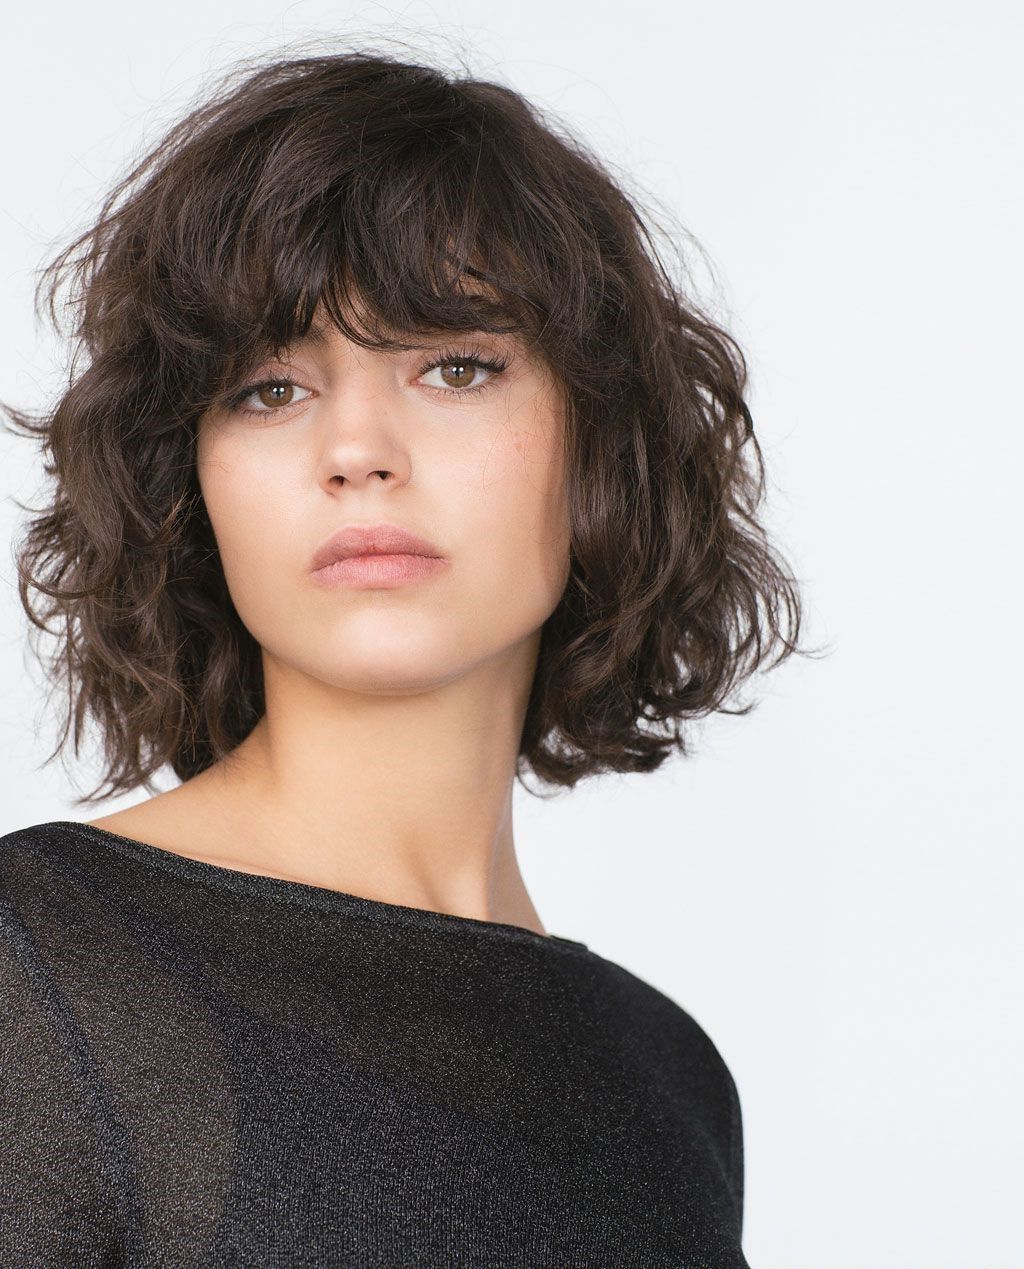 Latest Perfect Bangs And Wild Layers Hairstyles In Most Favored Short Bob With Bangs 2019 That You Can't Miss (Gallery 7 of 20)